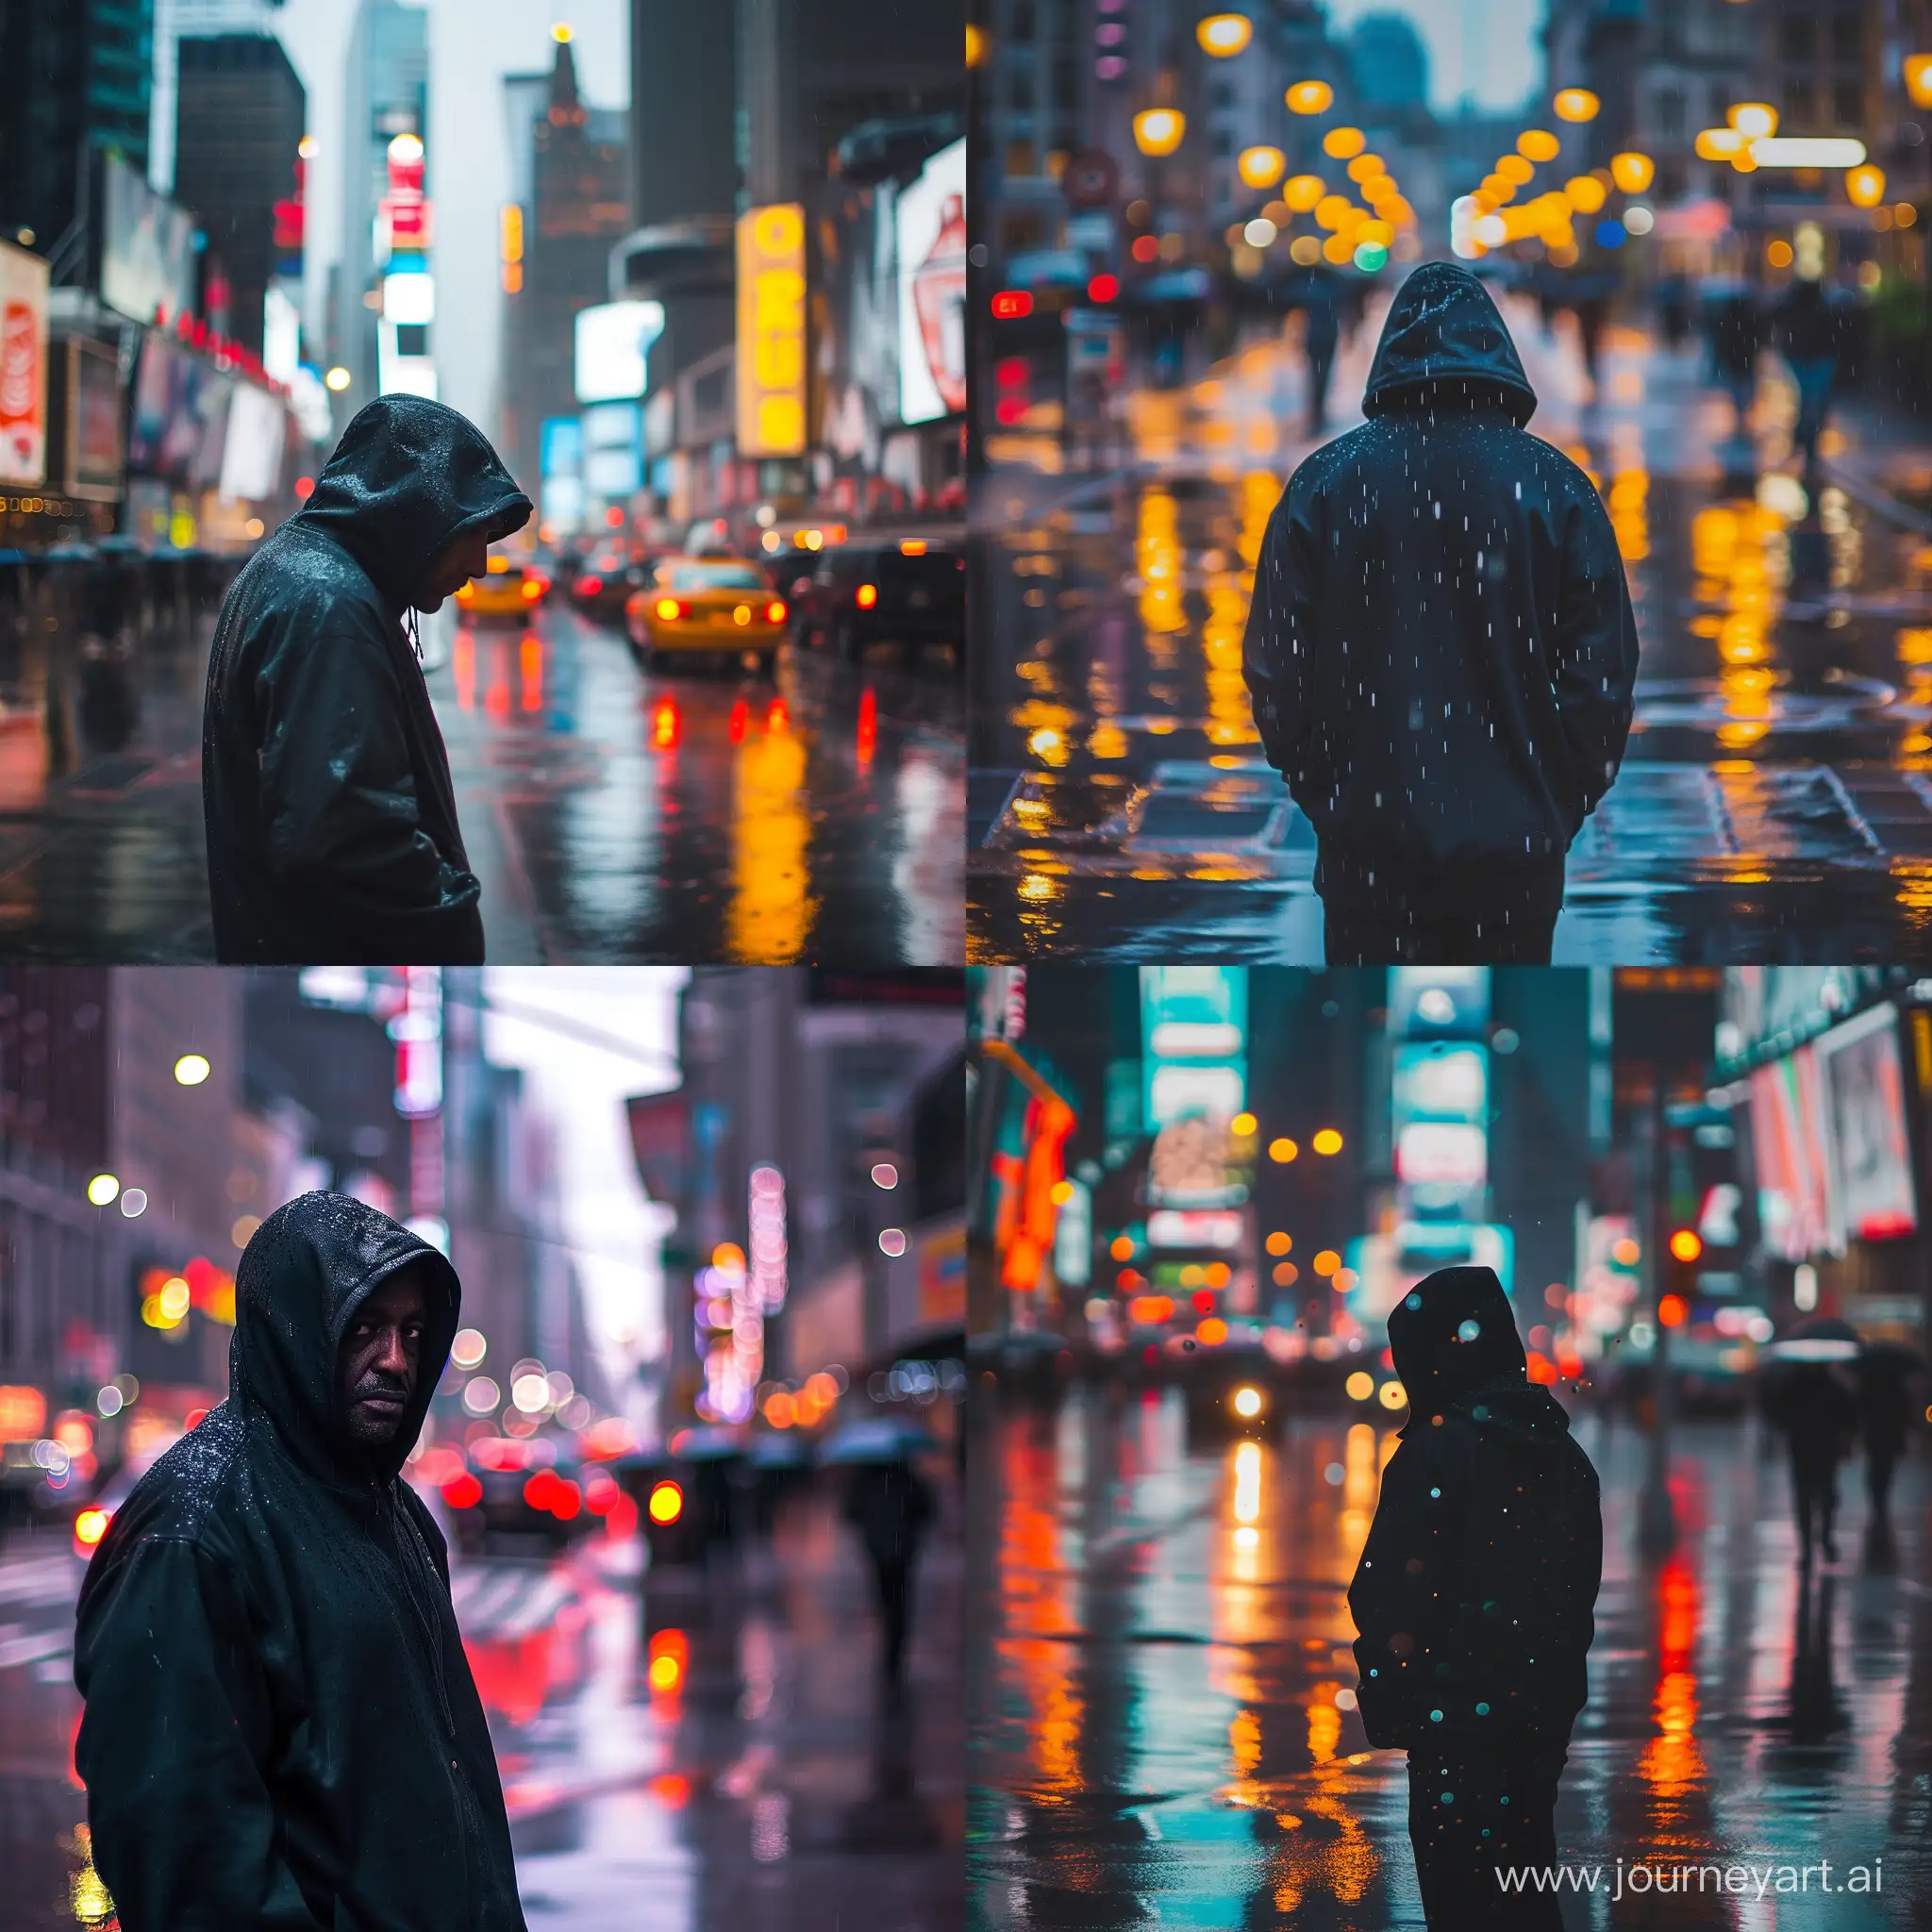 Create a visual poem on the streets with a wide-angle shot of a man in a hoodie amidst a downpour. Emphasize the reflections on wet pavements and the shimmering lights in the rain. Use creative framing to capture the cinematic essence of the urban environment. Focus on the details of the hoodie and the expression of the person, telling a story within the frame.
 --v 6